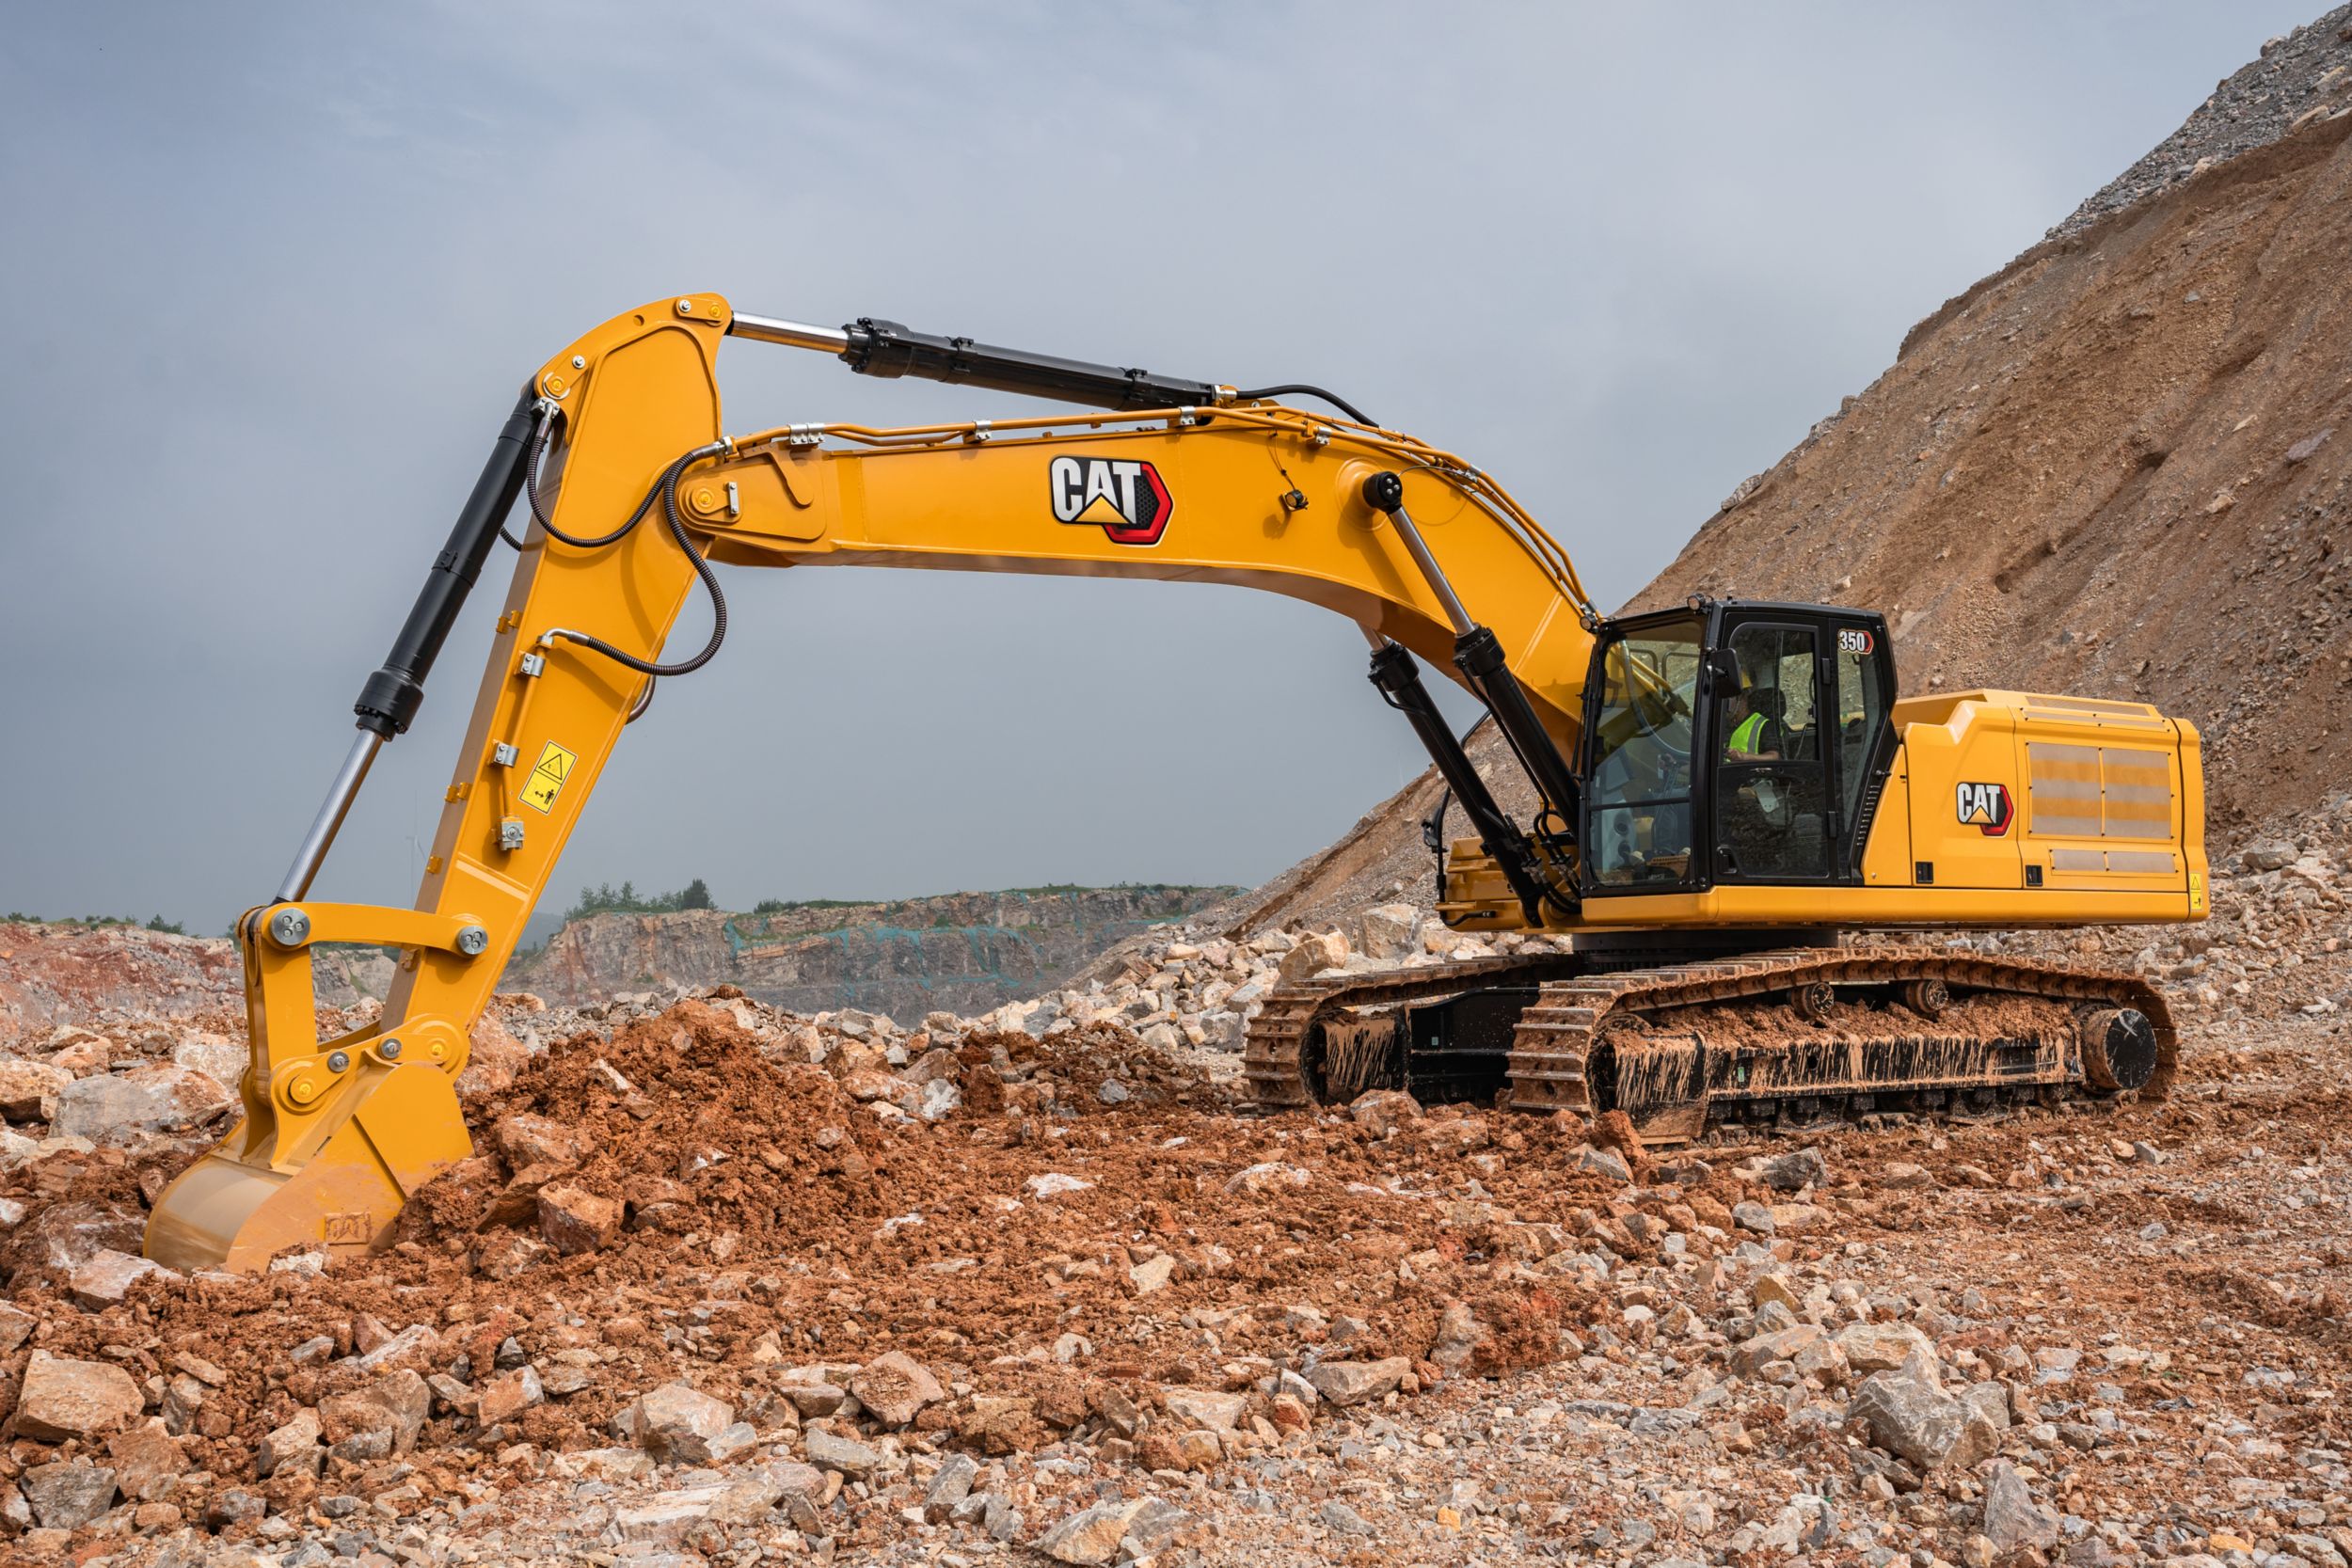 With Cat attachments, the 350 cuts through tough material quickly and efficiently.